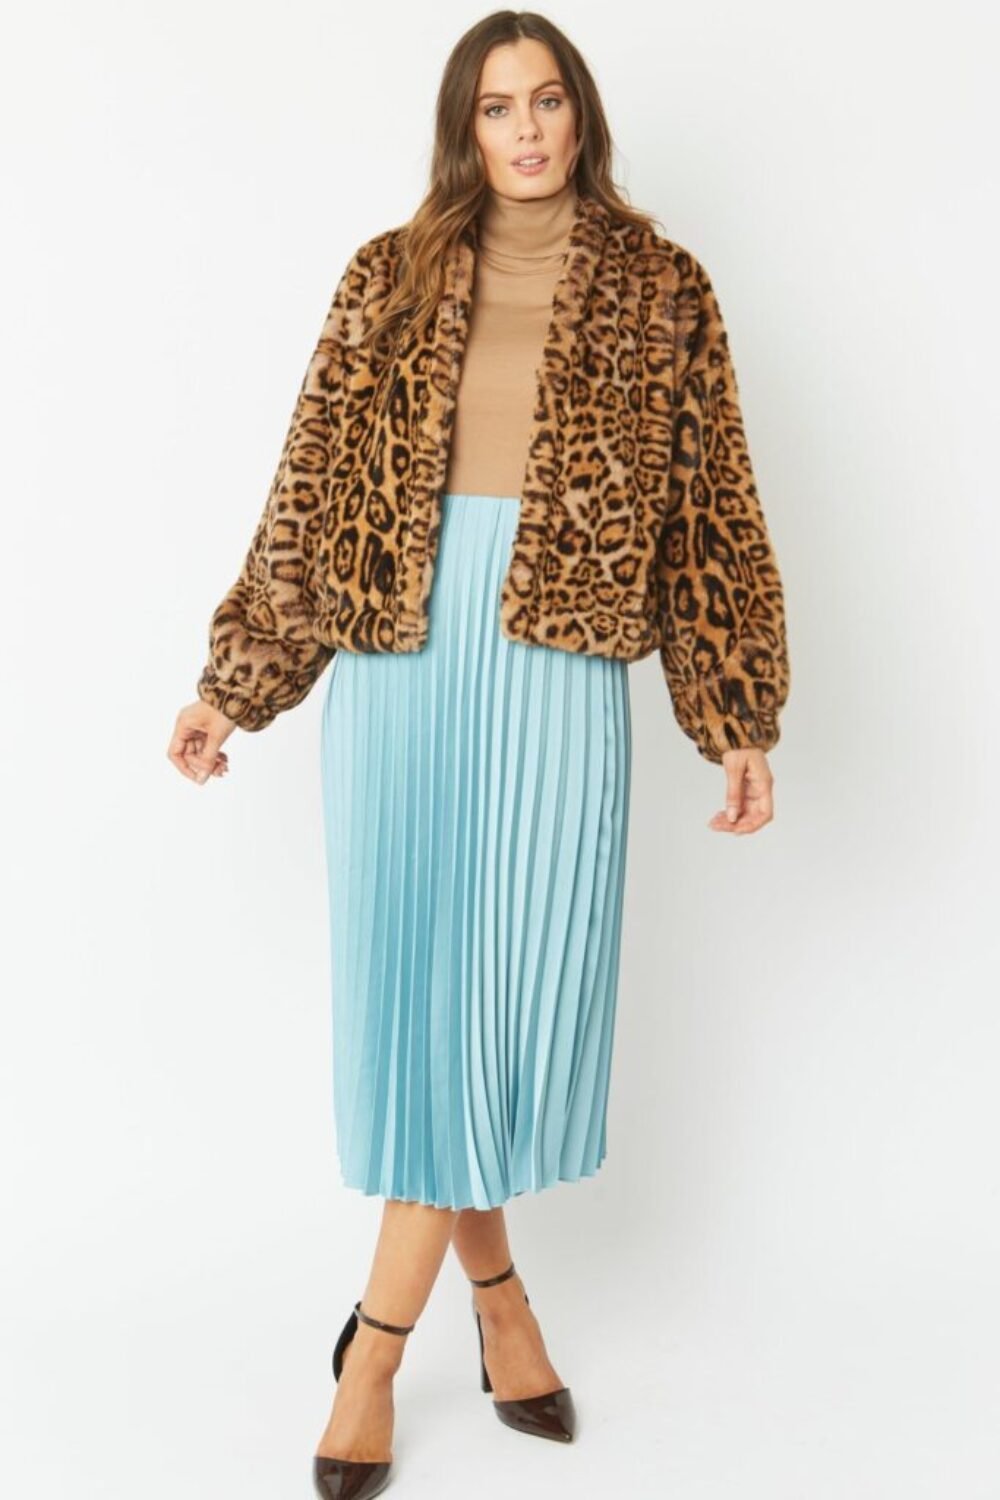 Shop Lux Faux Fur Animal Print Jacket and women's luxury and designer clothes at www.lux-apparel.co.uk